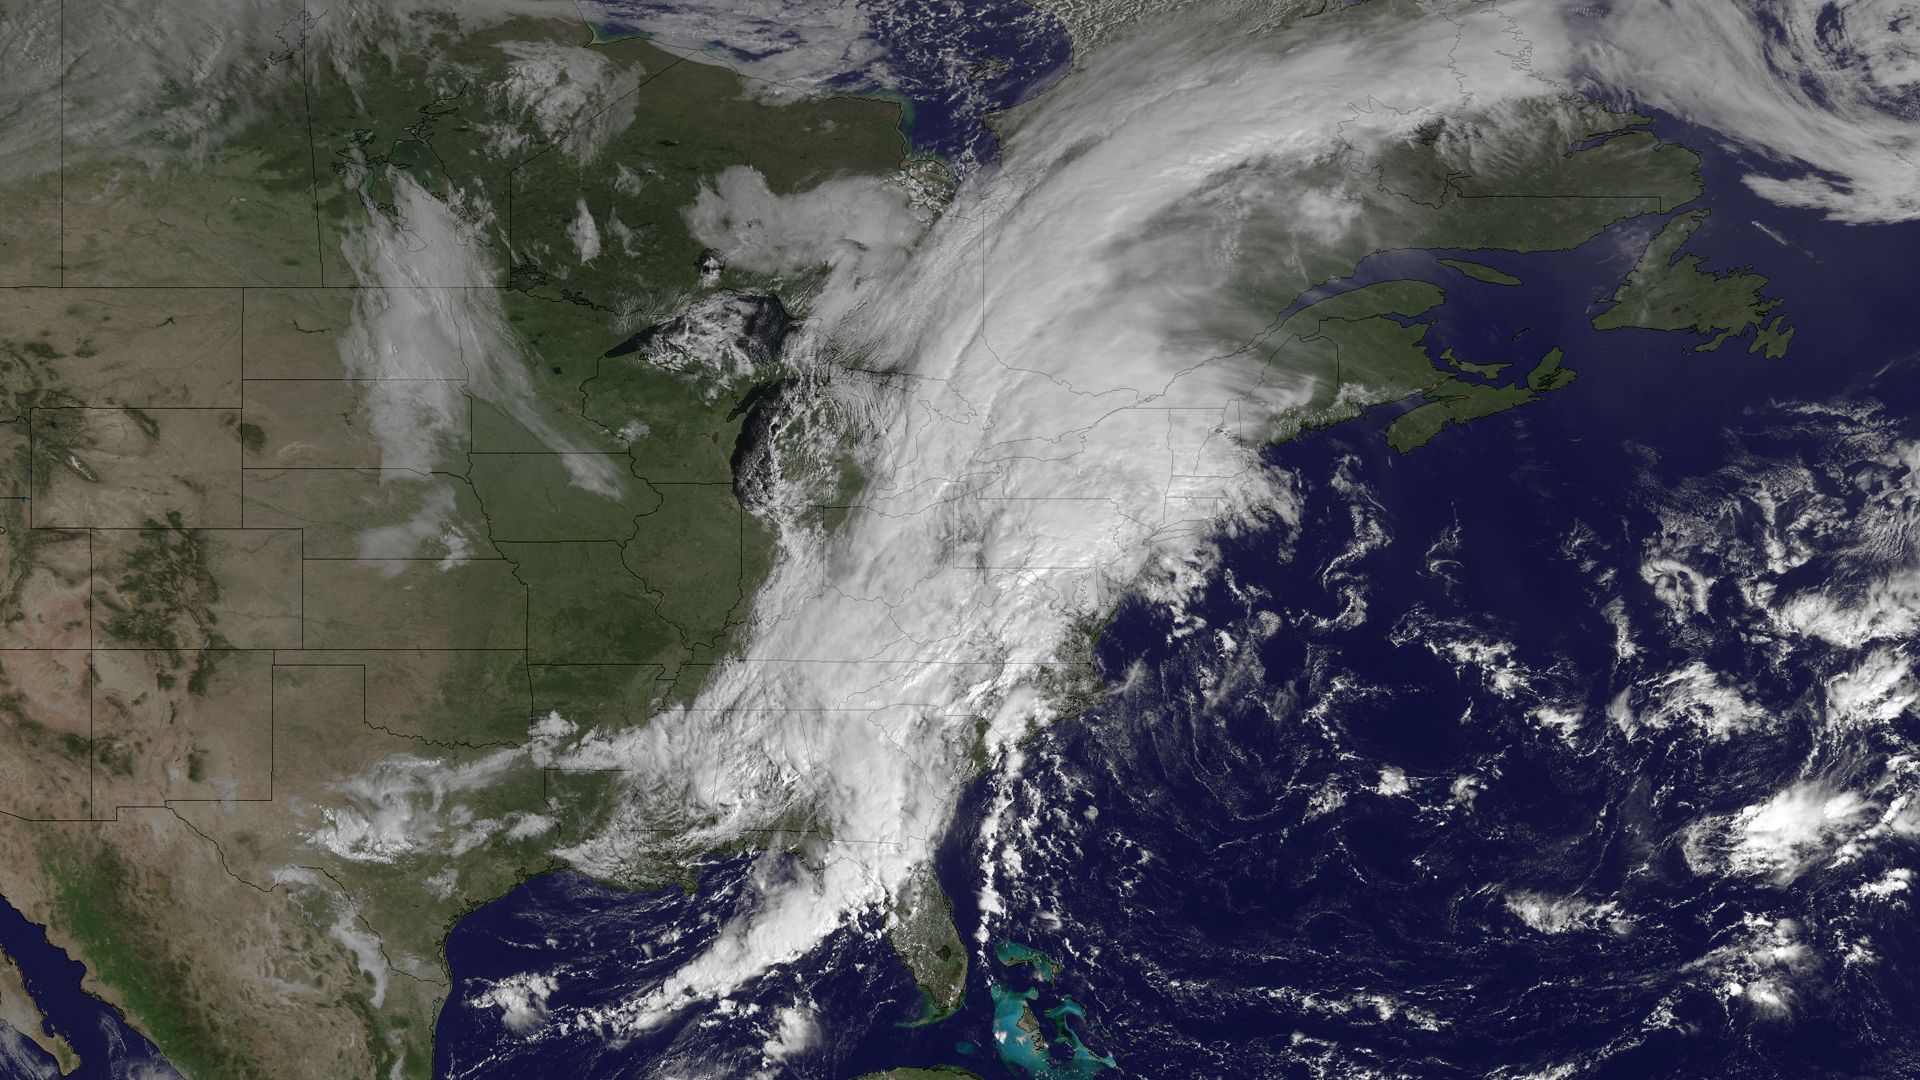 Spotted from Space: Extreme Weather over the East Coast | Space